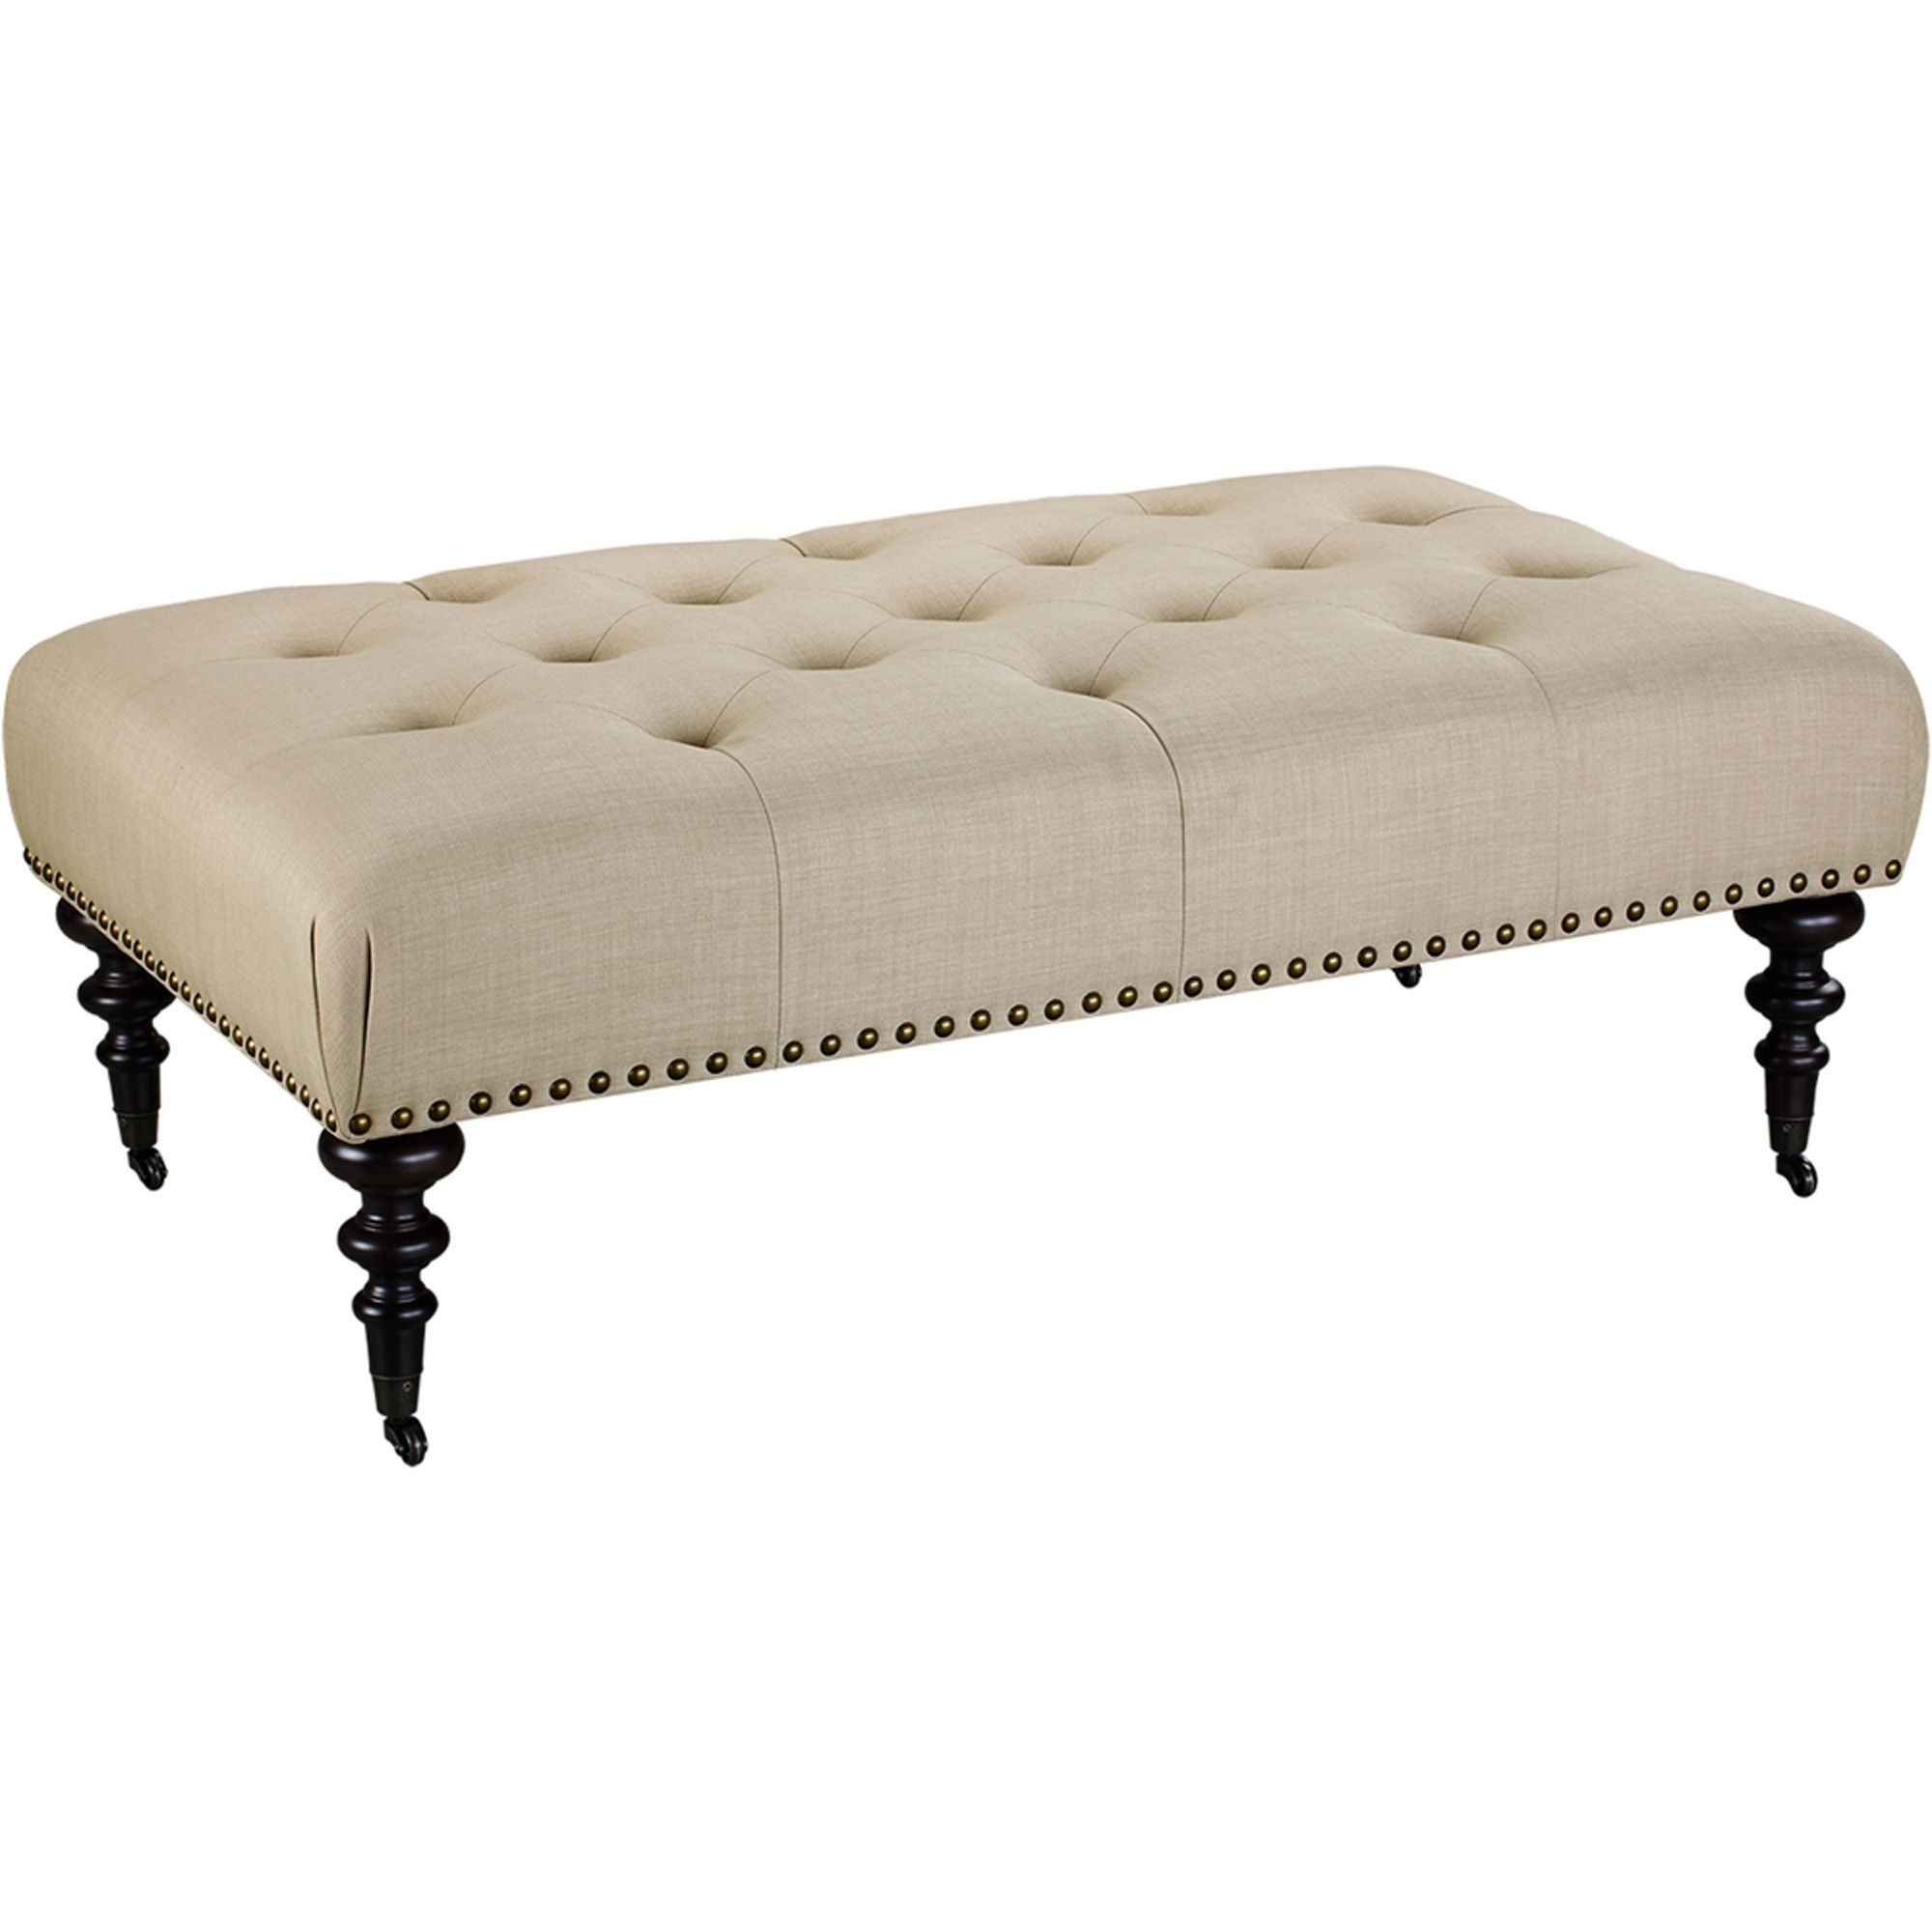 Dorel Living Winston Button Tufted Upholstered Ottoman, Beige In Ottomans With Wheels (View 9 of 10)